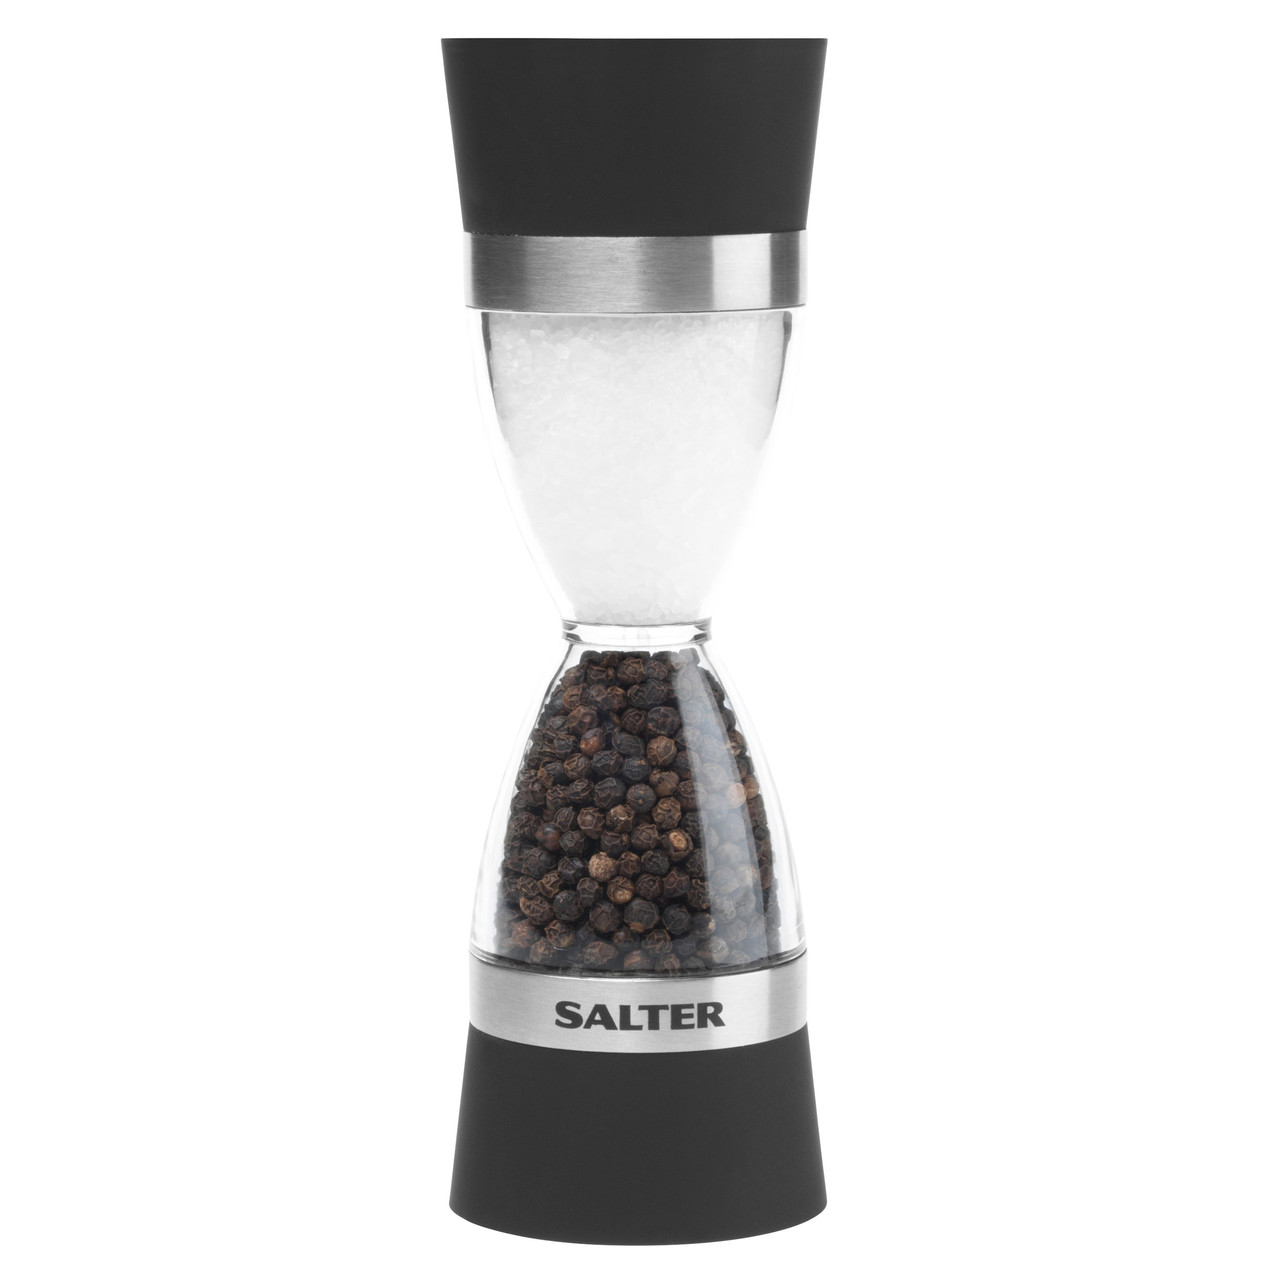 Salter 2 In 1 Mechanical Salt and Pepper Mill, Double Sided Spice Grinder, Adjustable Grinding from Fine to Coarse, Ceramic Grinder